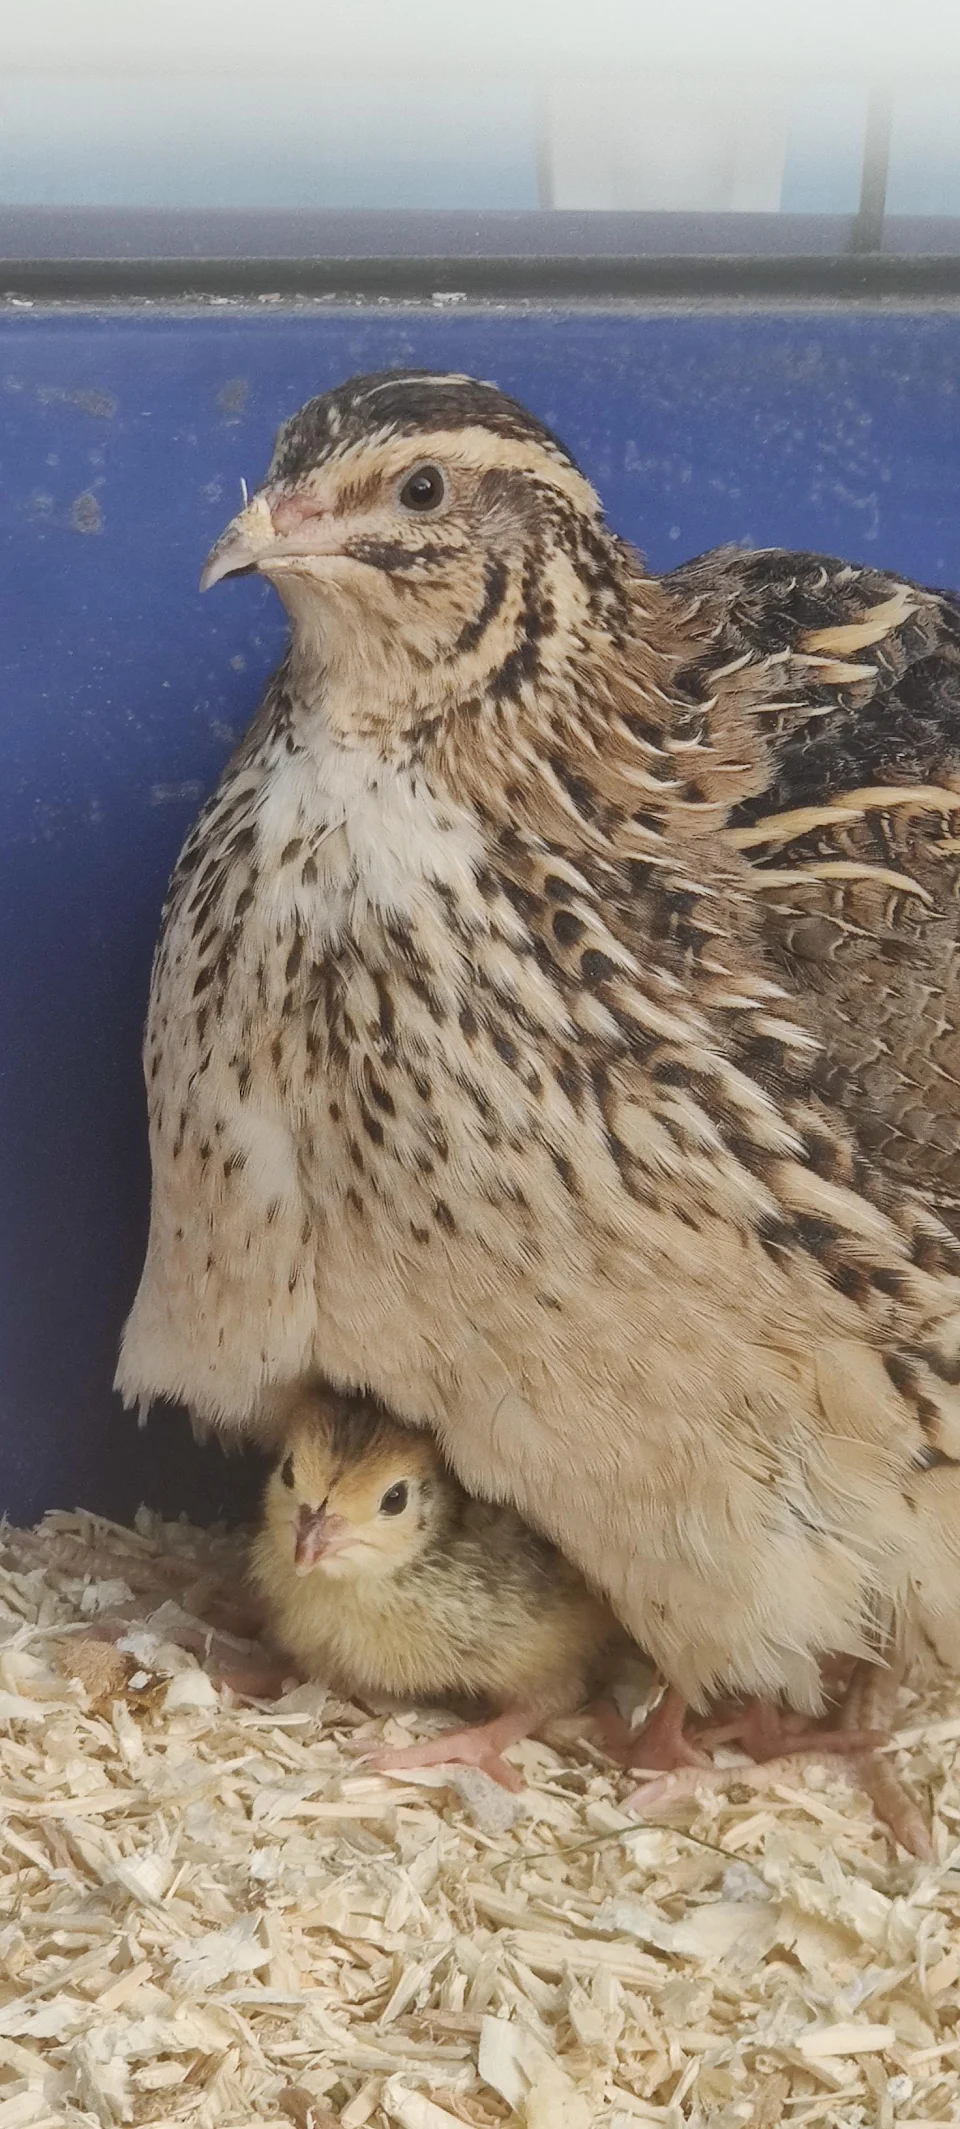 My pet quail with one of her chicks